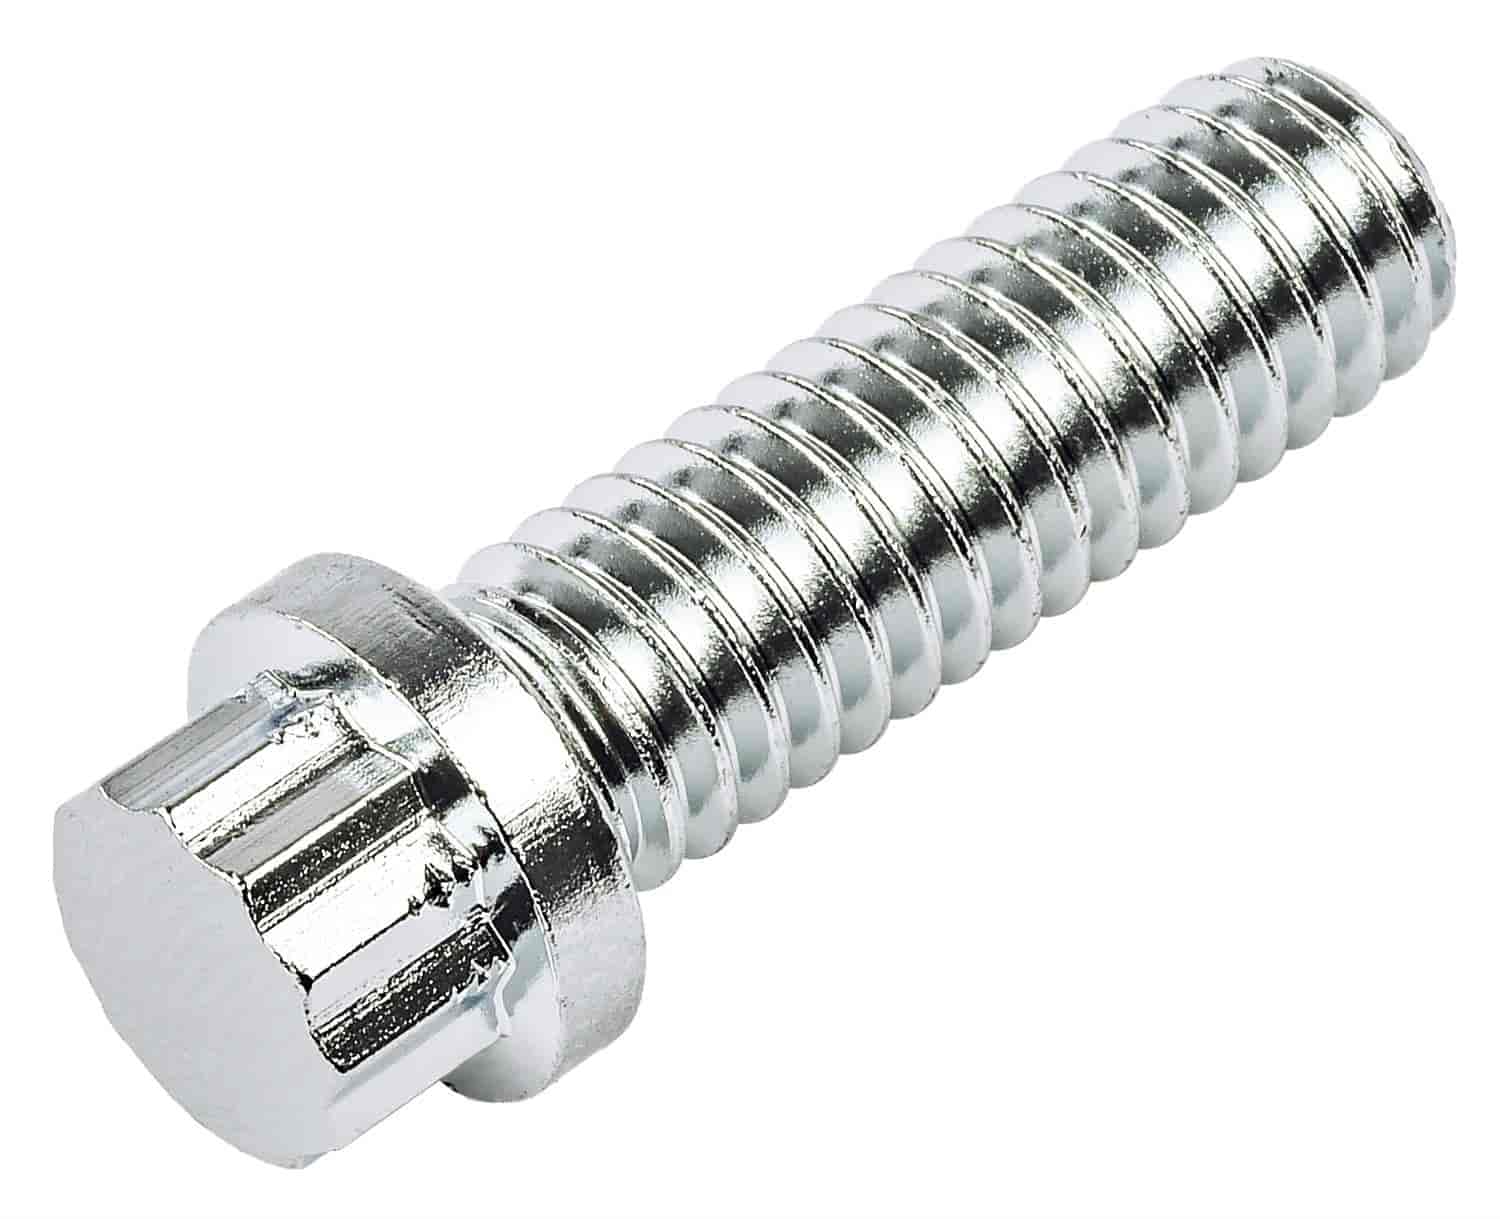 12-Point Fastener [5/16 in. -18 Thread x 1 in. Length]